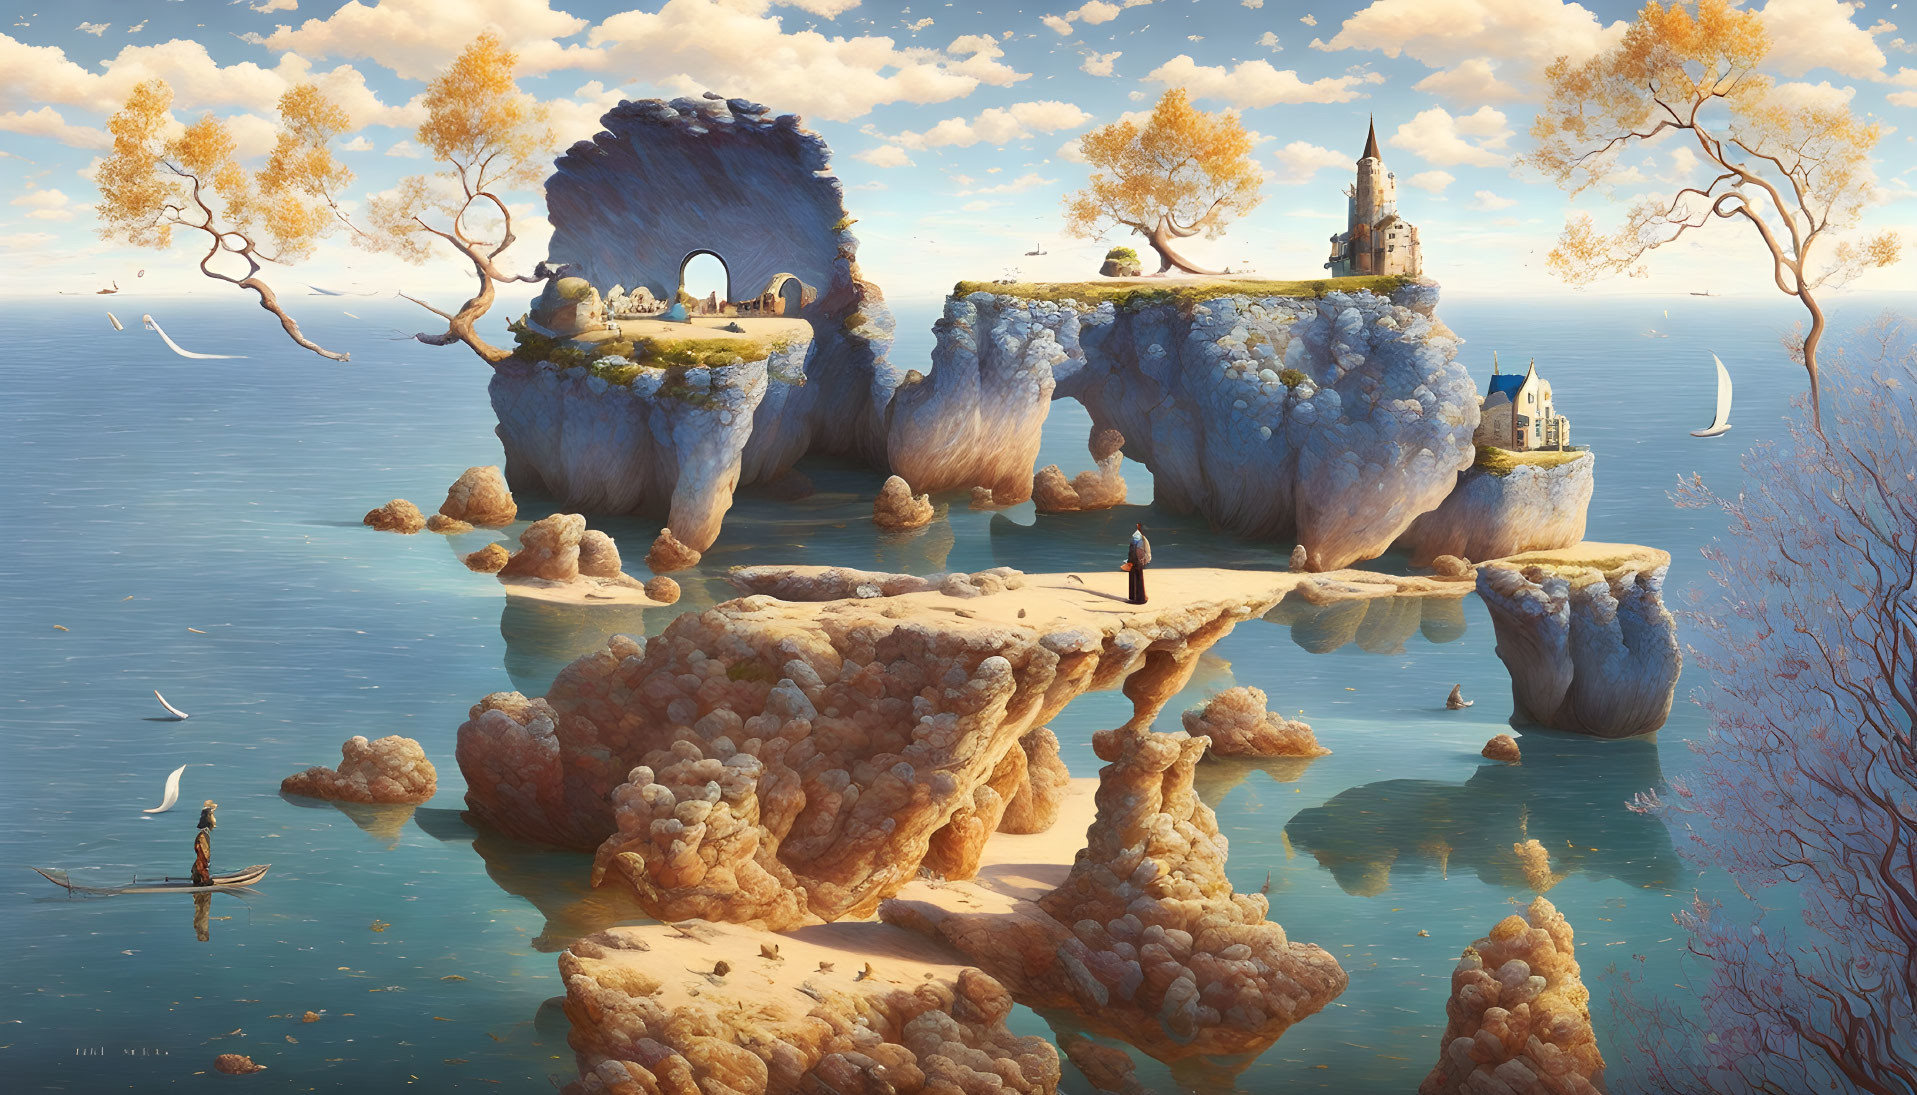 Fantastical seascape with floating islands, autumn trees, boat, people, and birds.